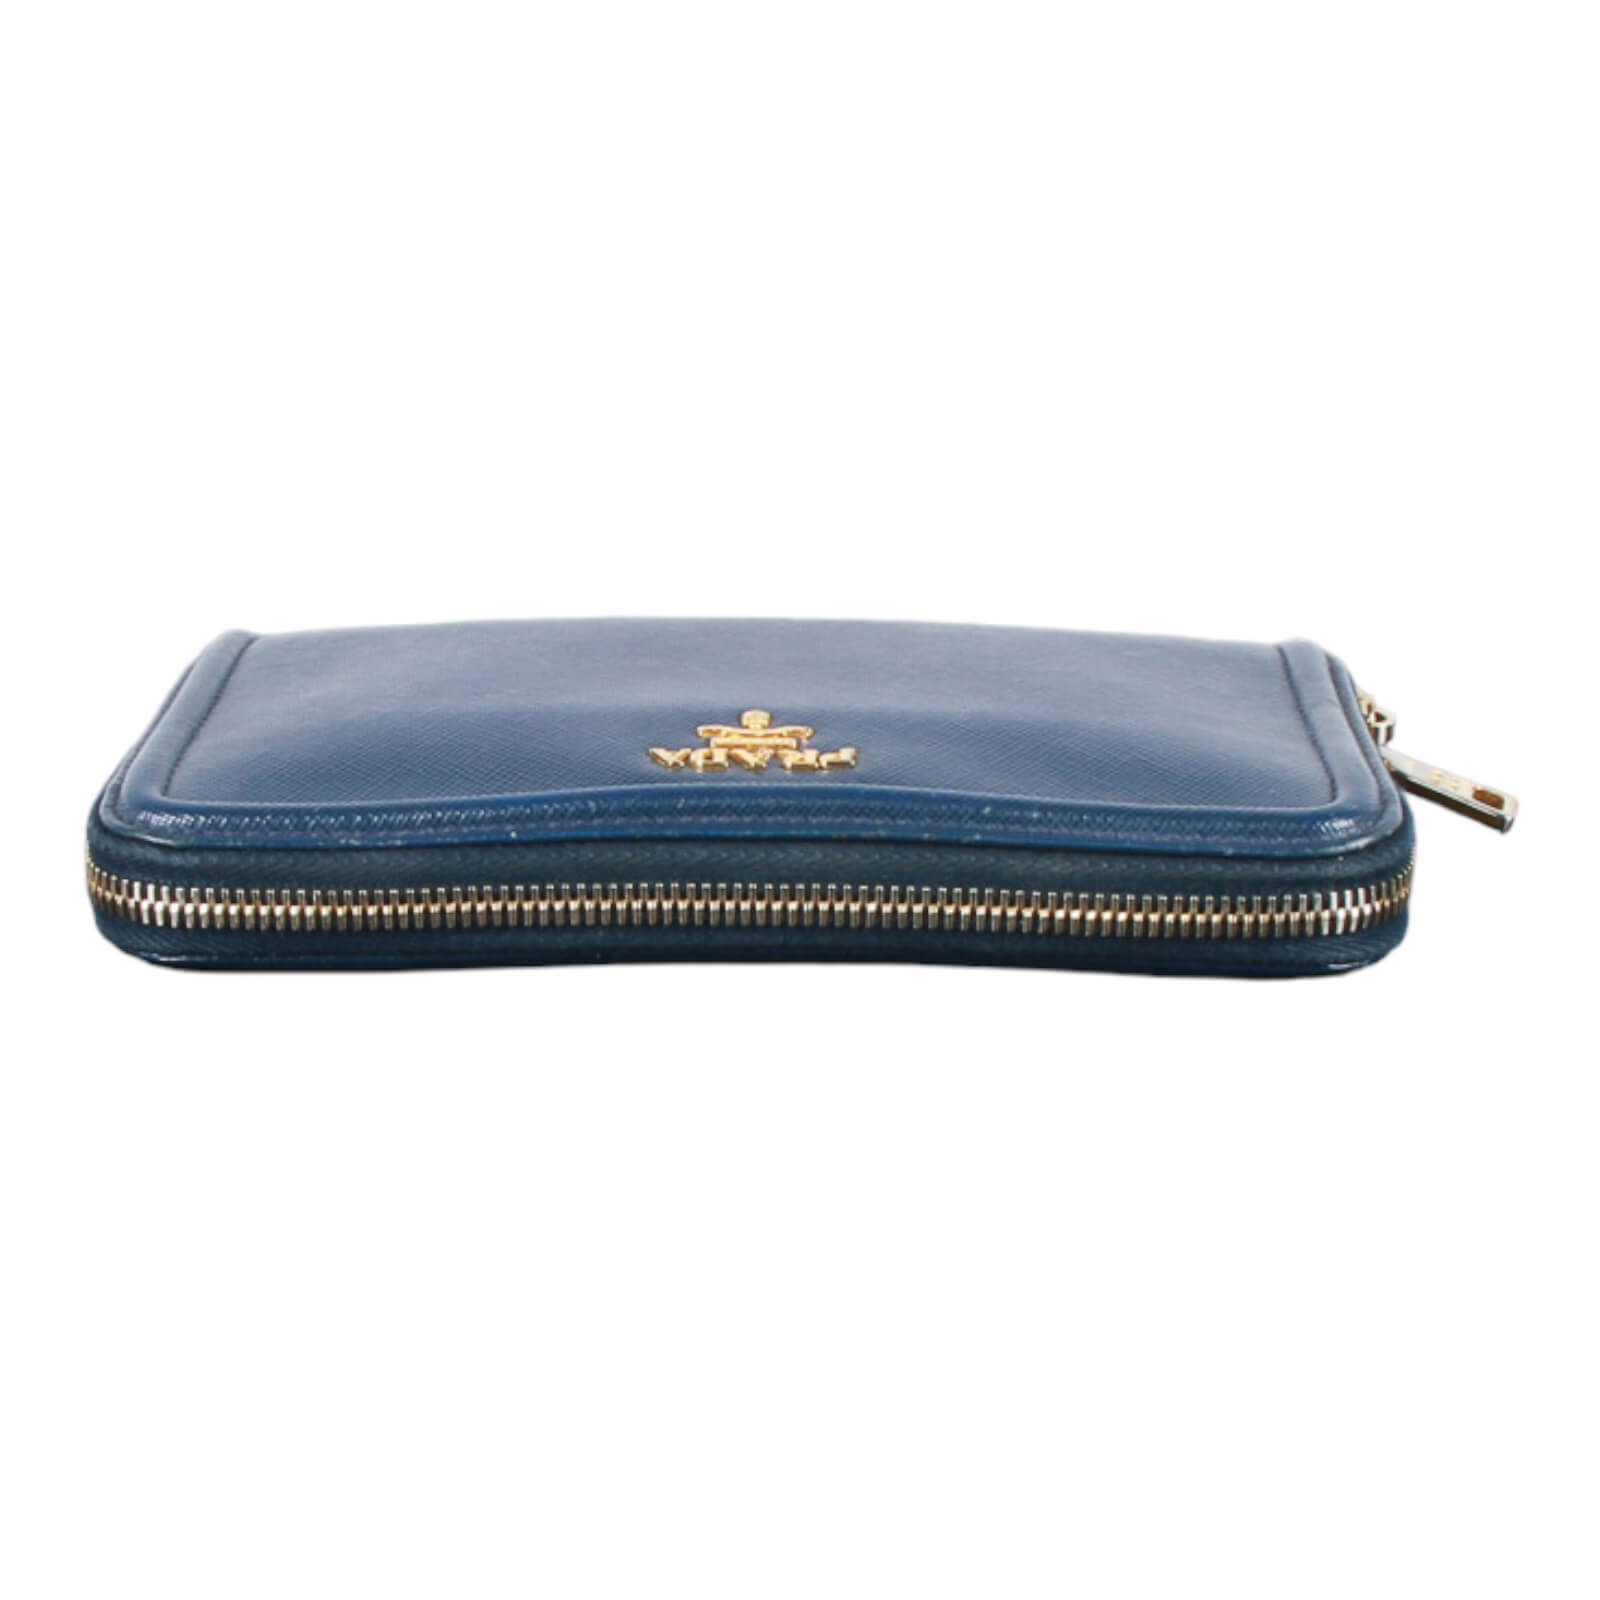 Authentic, pre-owned PRADA Long Zip Blue Saffiano Leather Wallet